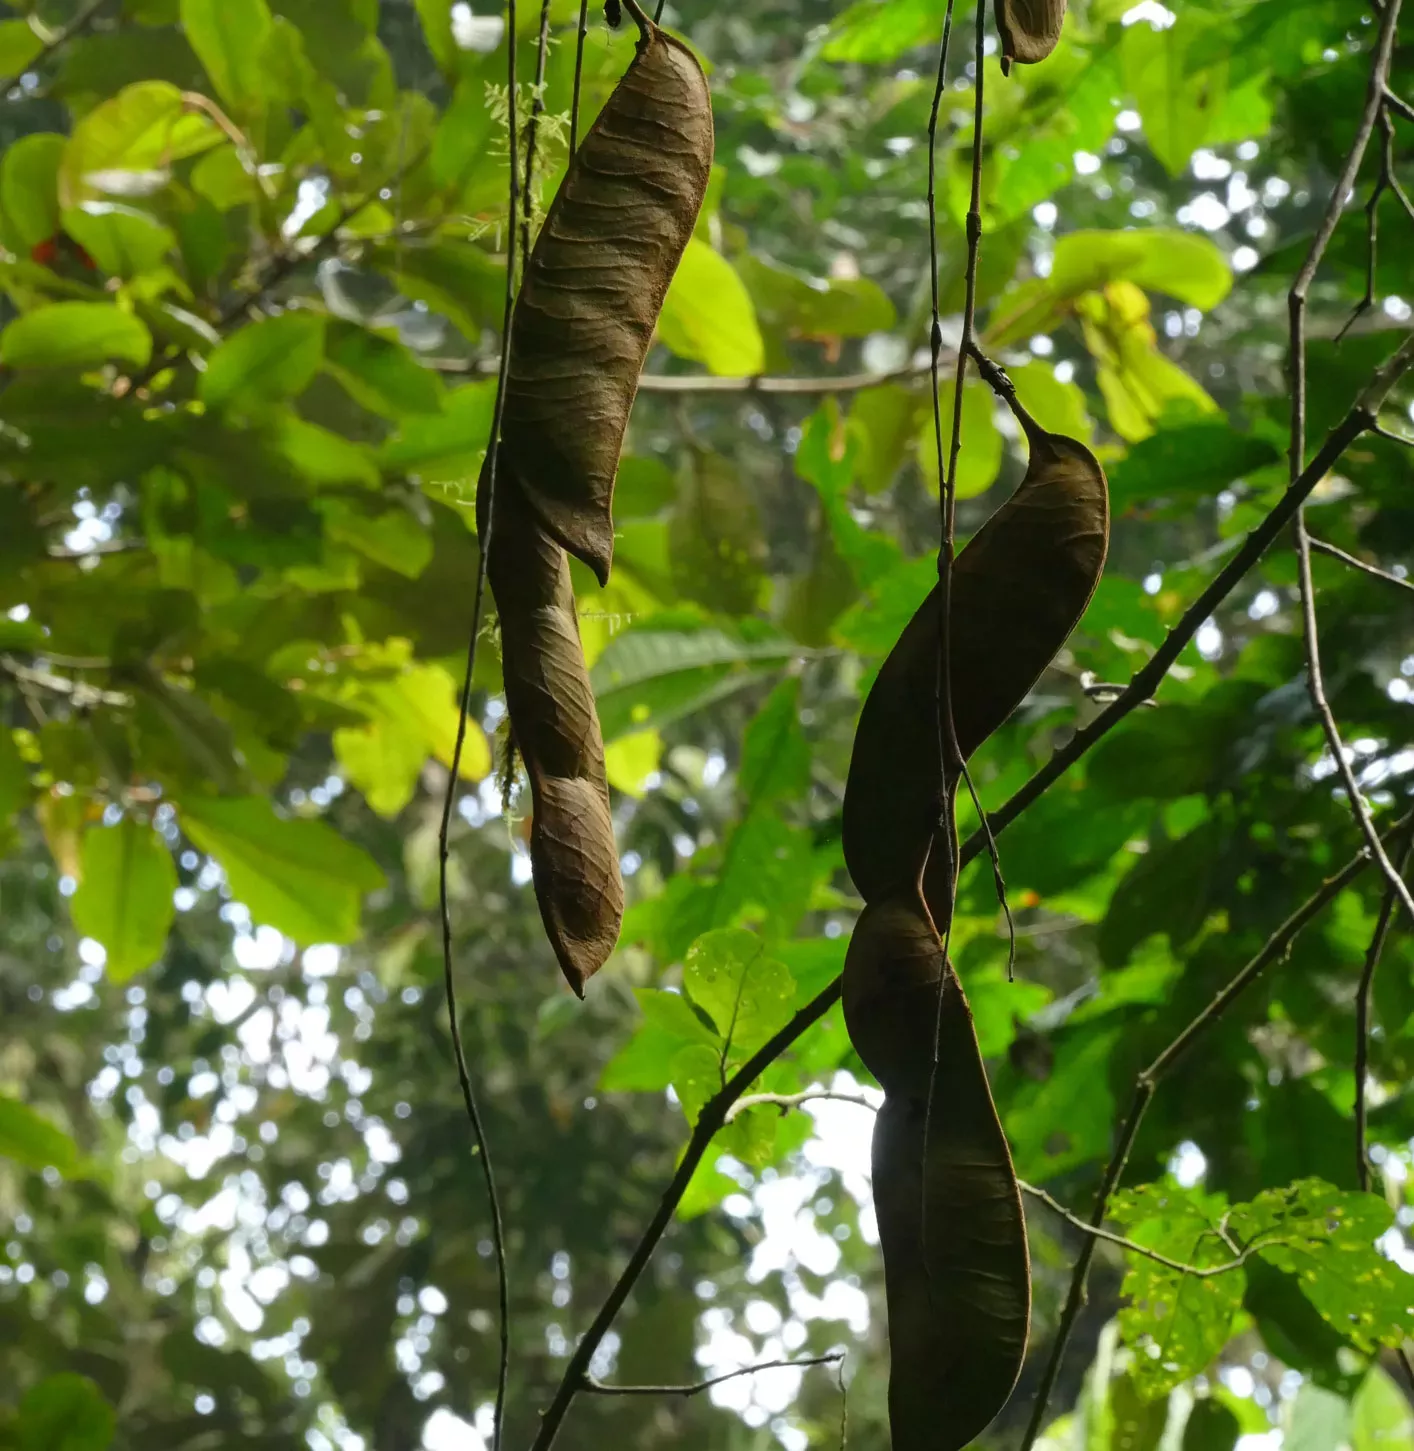 Two large legume pods of Ecuadendron acosta-solisianum hanging from the tree